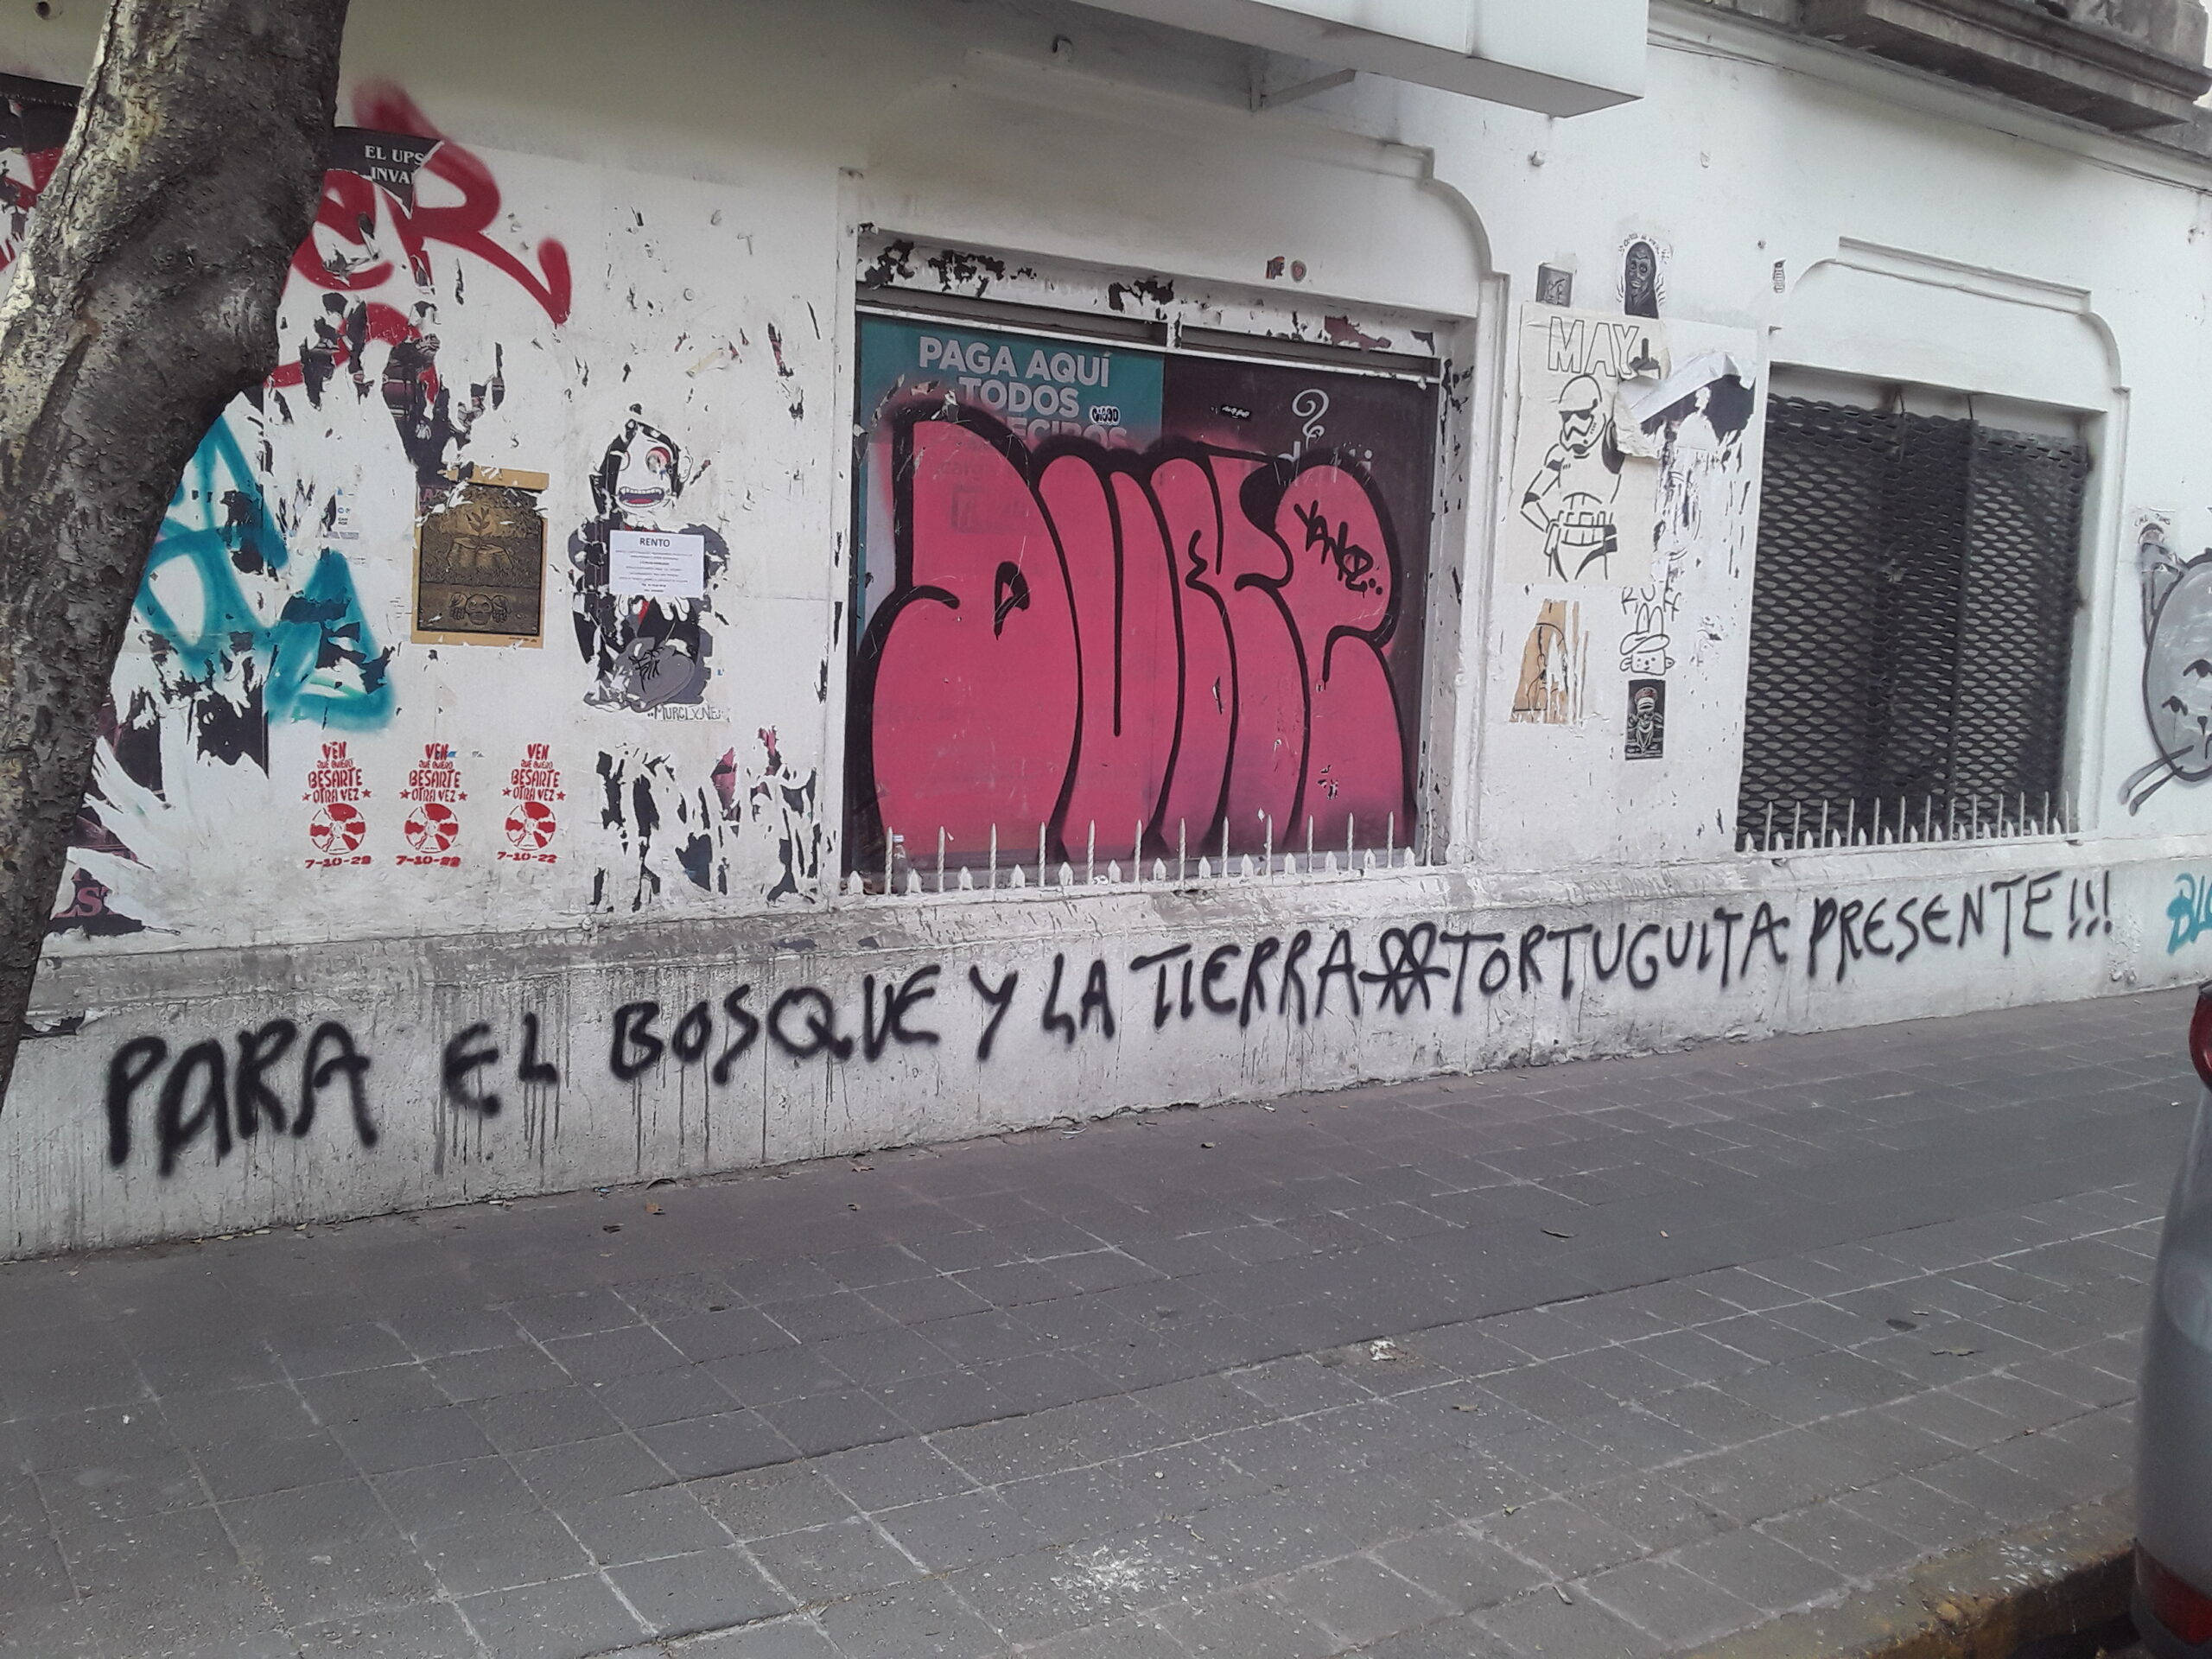 On a white wall covered with old wheatpasted flyers and other tags, "PARA EL BOSQUE Y LA TIERRA" - then a heart with an A inside of it in the style of an anarchist circle-A symbol - "TORTUGUITA PRESENTE!!!" is tagged in black spray paint.